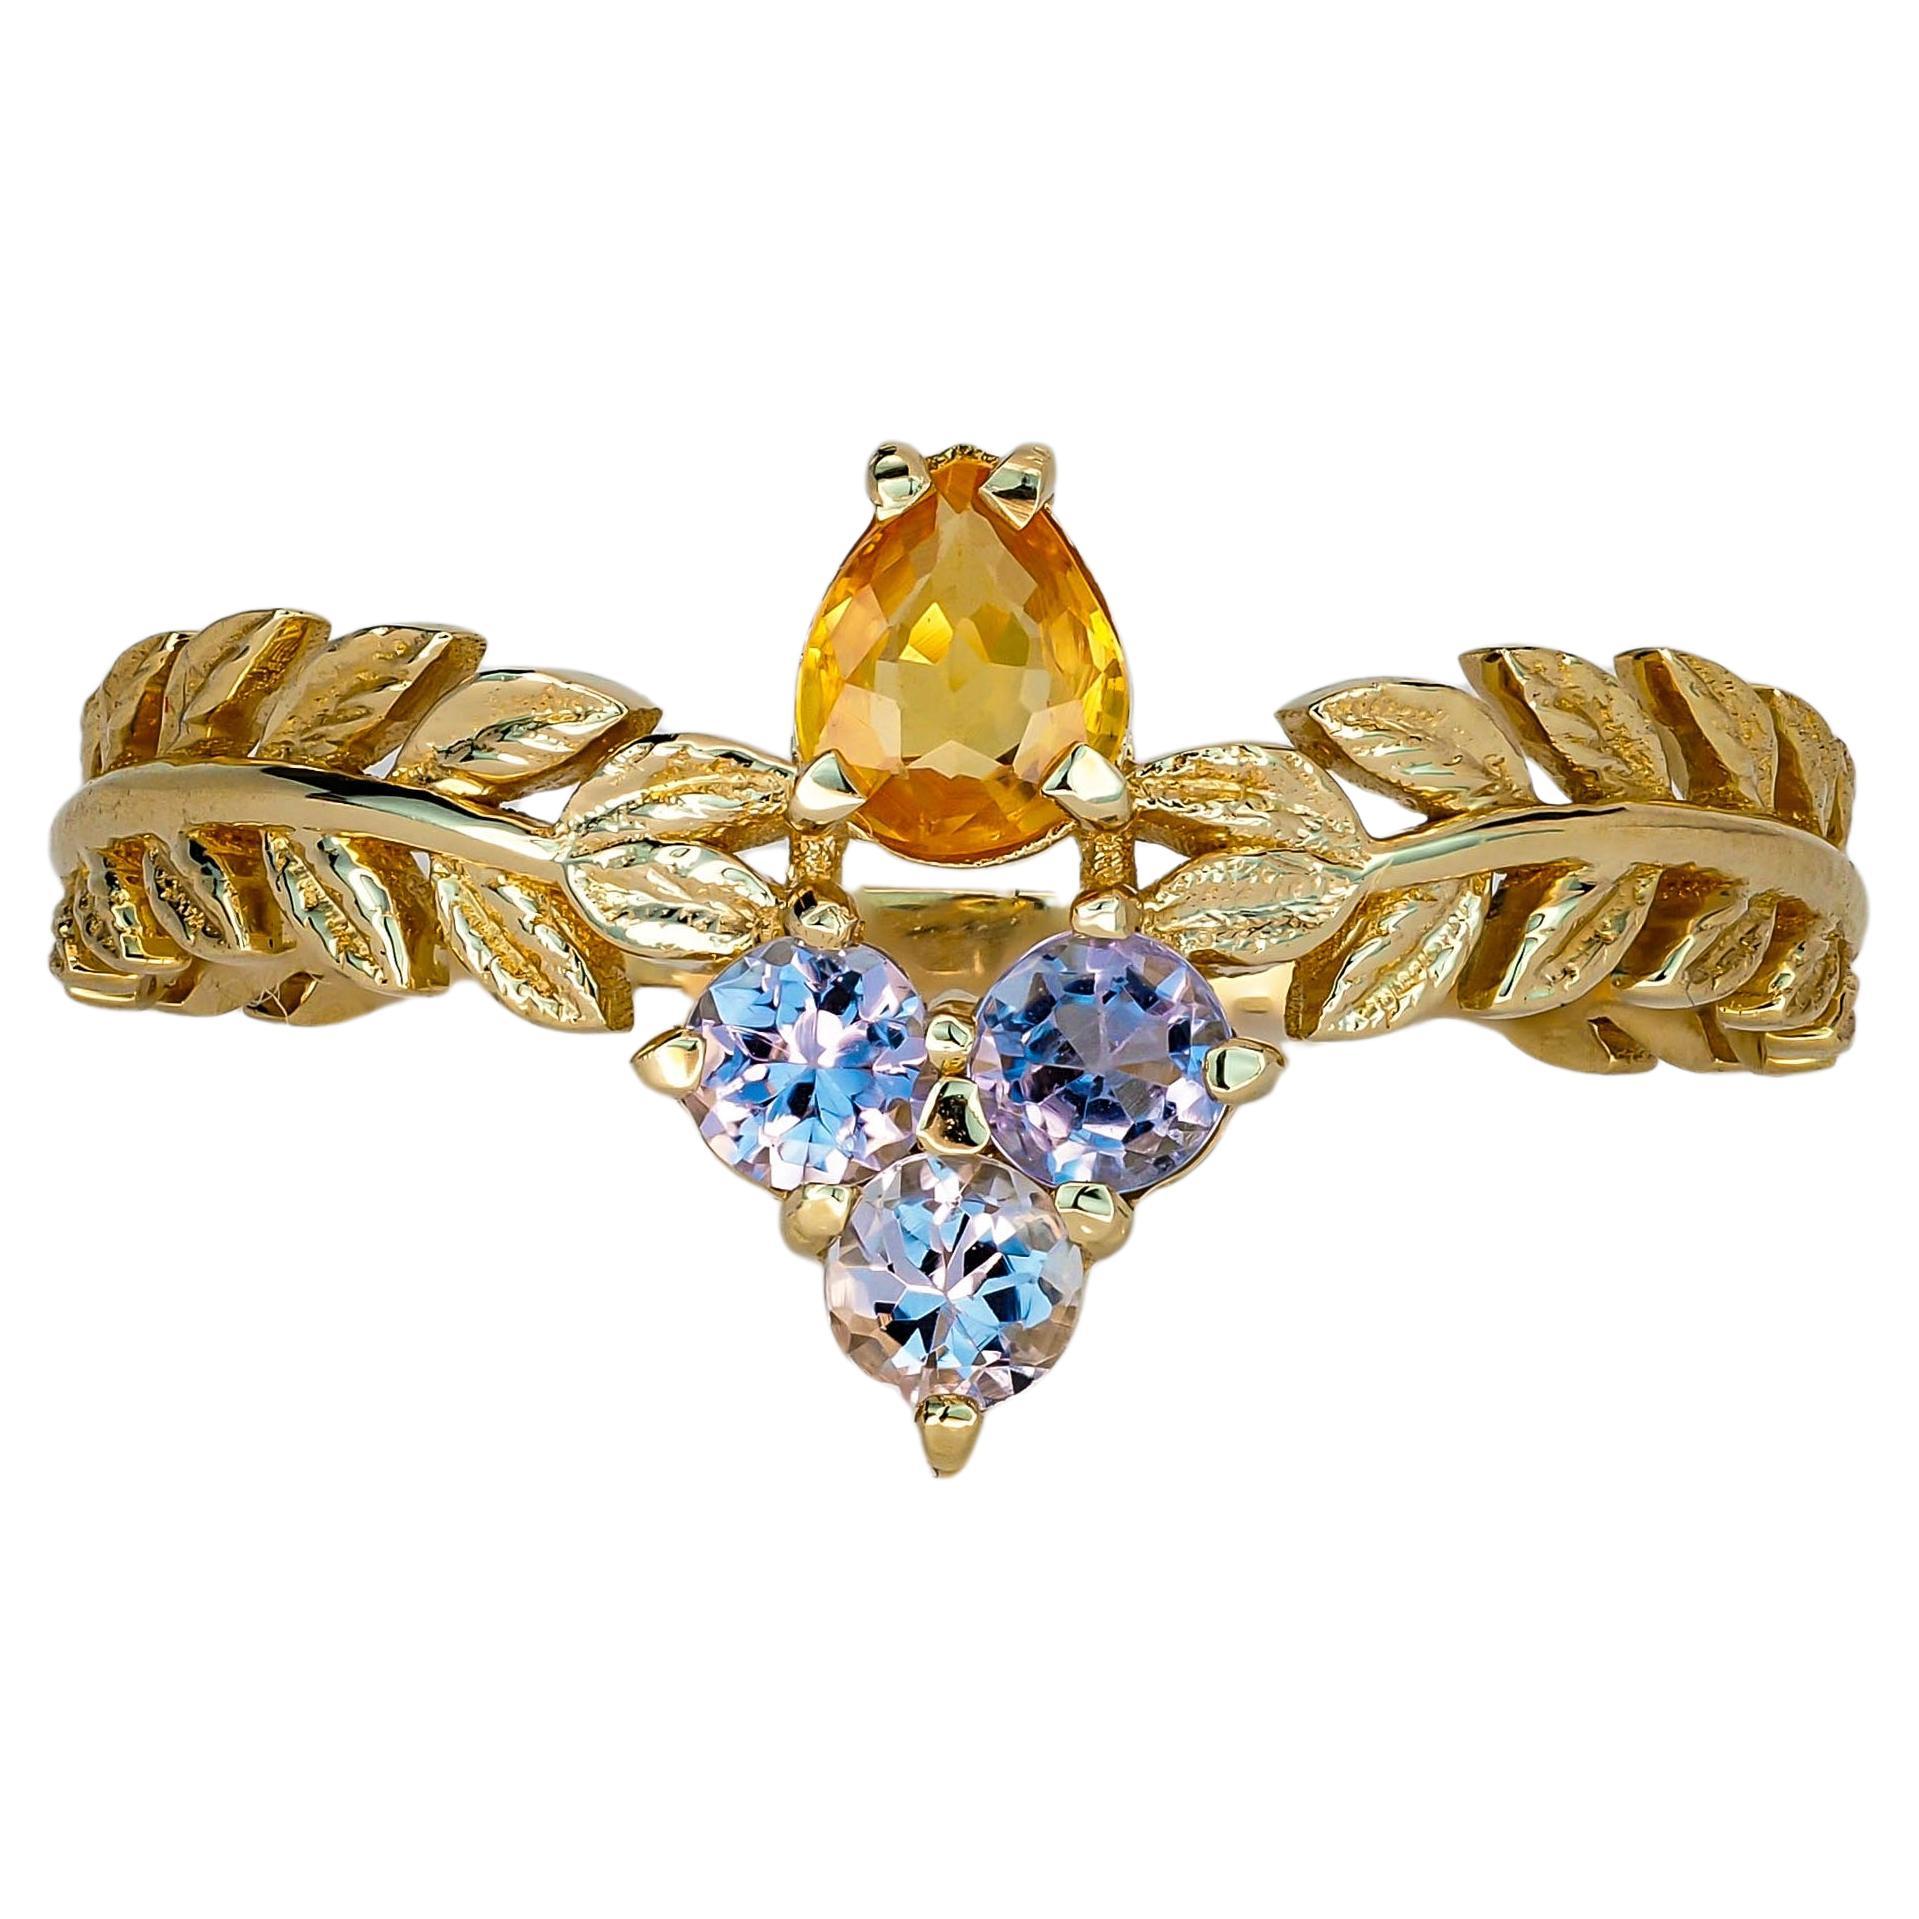 Pear sapphire 14k gold ring. 